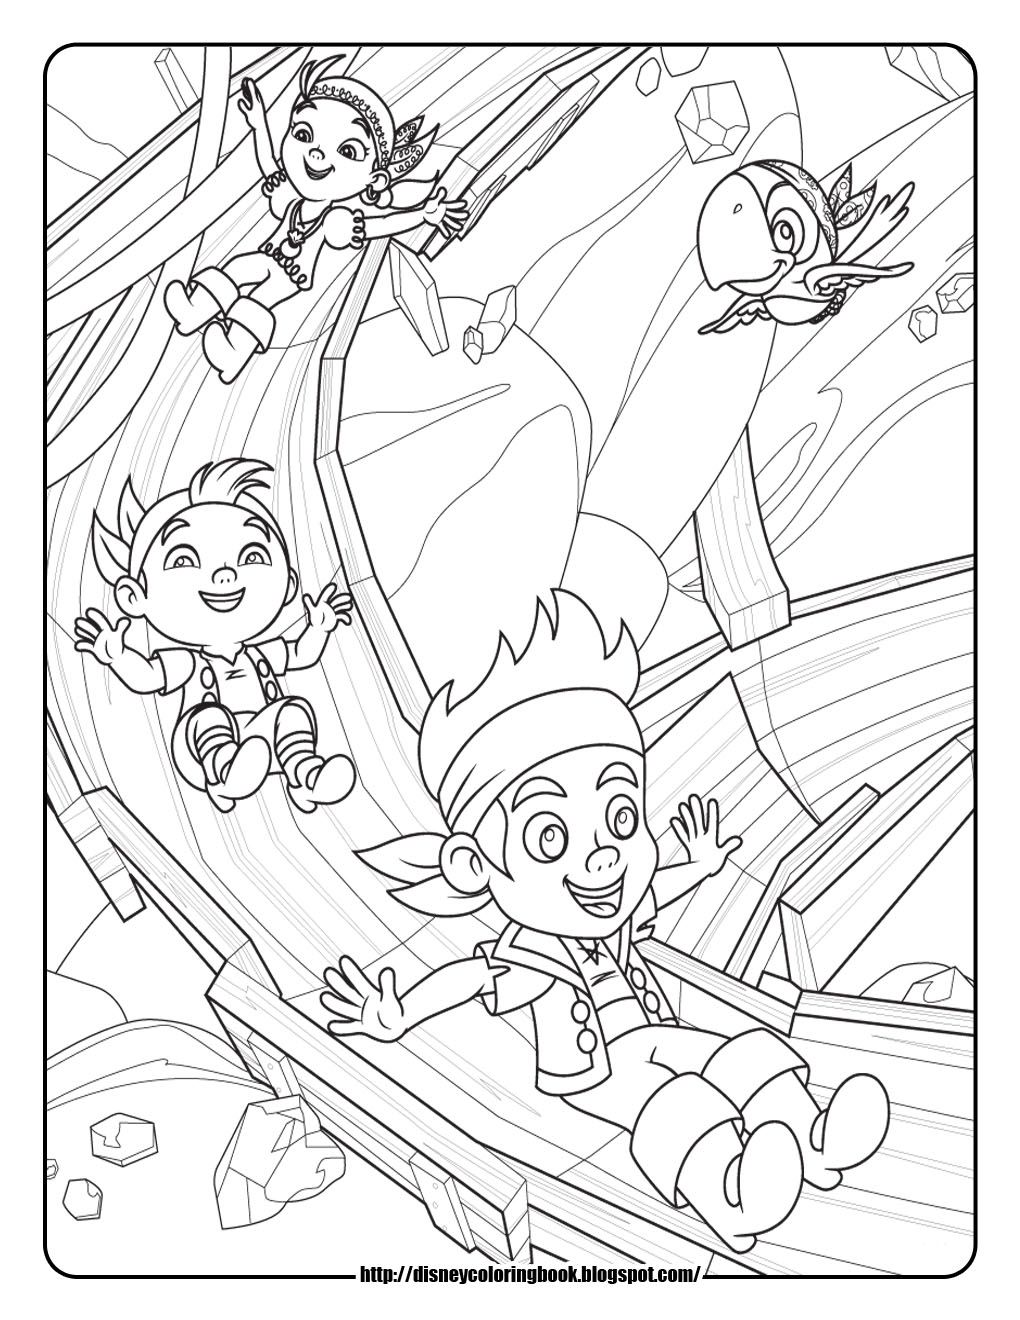 Happy Jake and The Neverland Pirates Coloring Pages #5007 Jake and ...